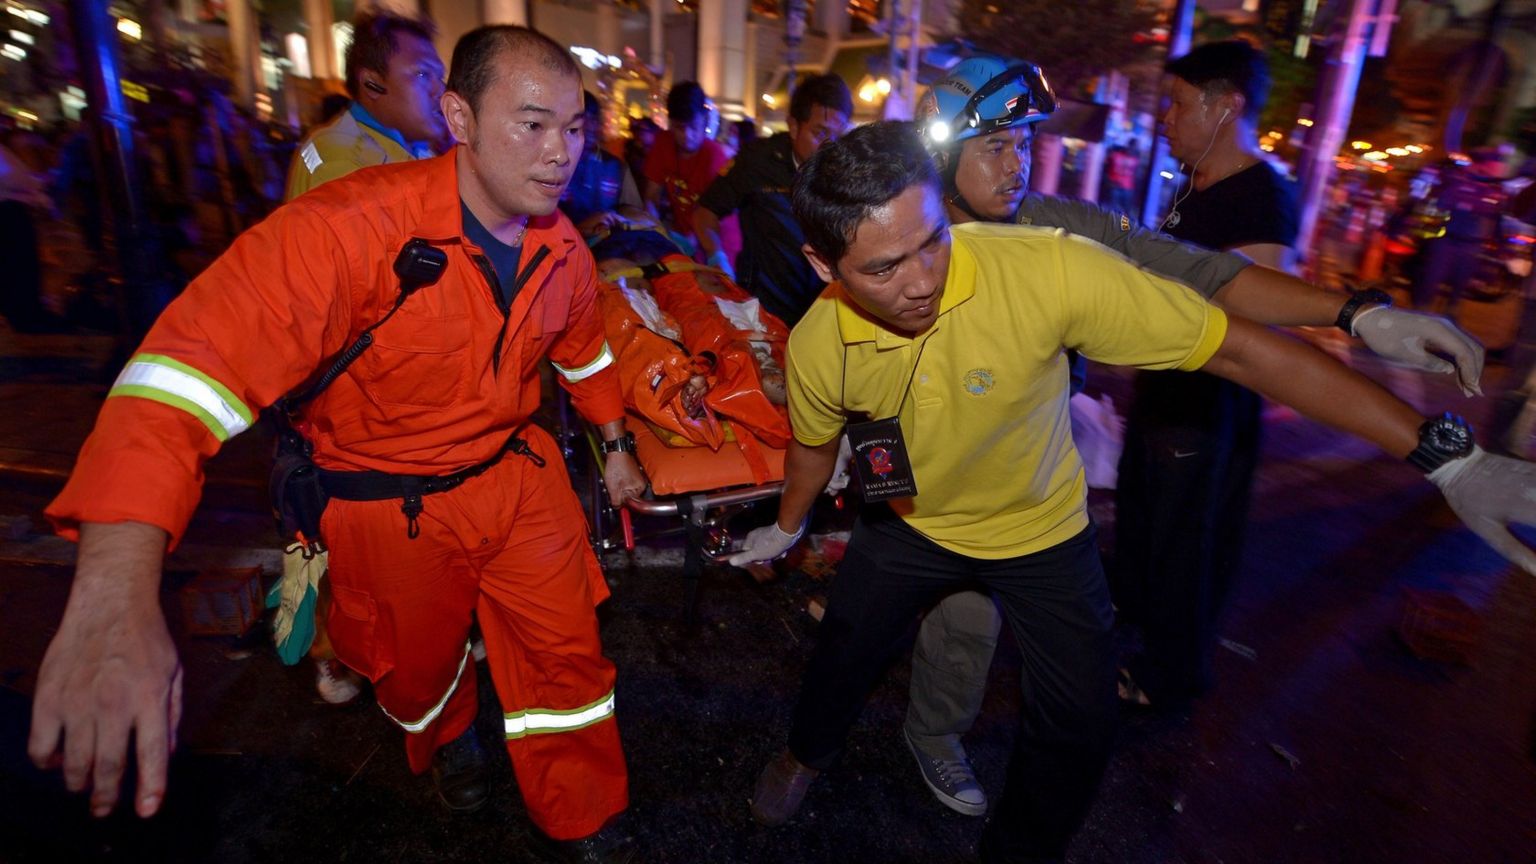 Rescue workers carry an injured person away from a bomb blast in Bangkok